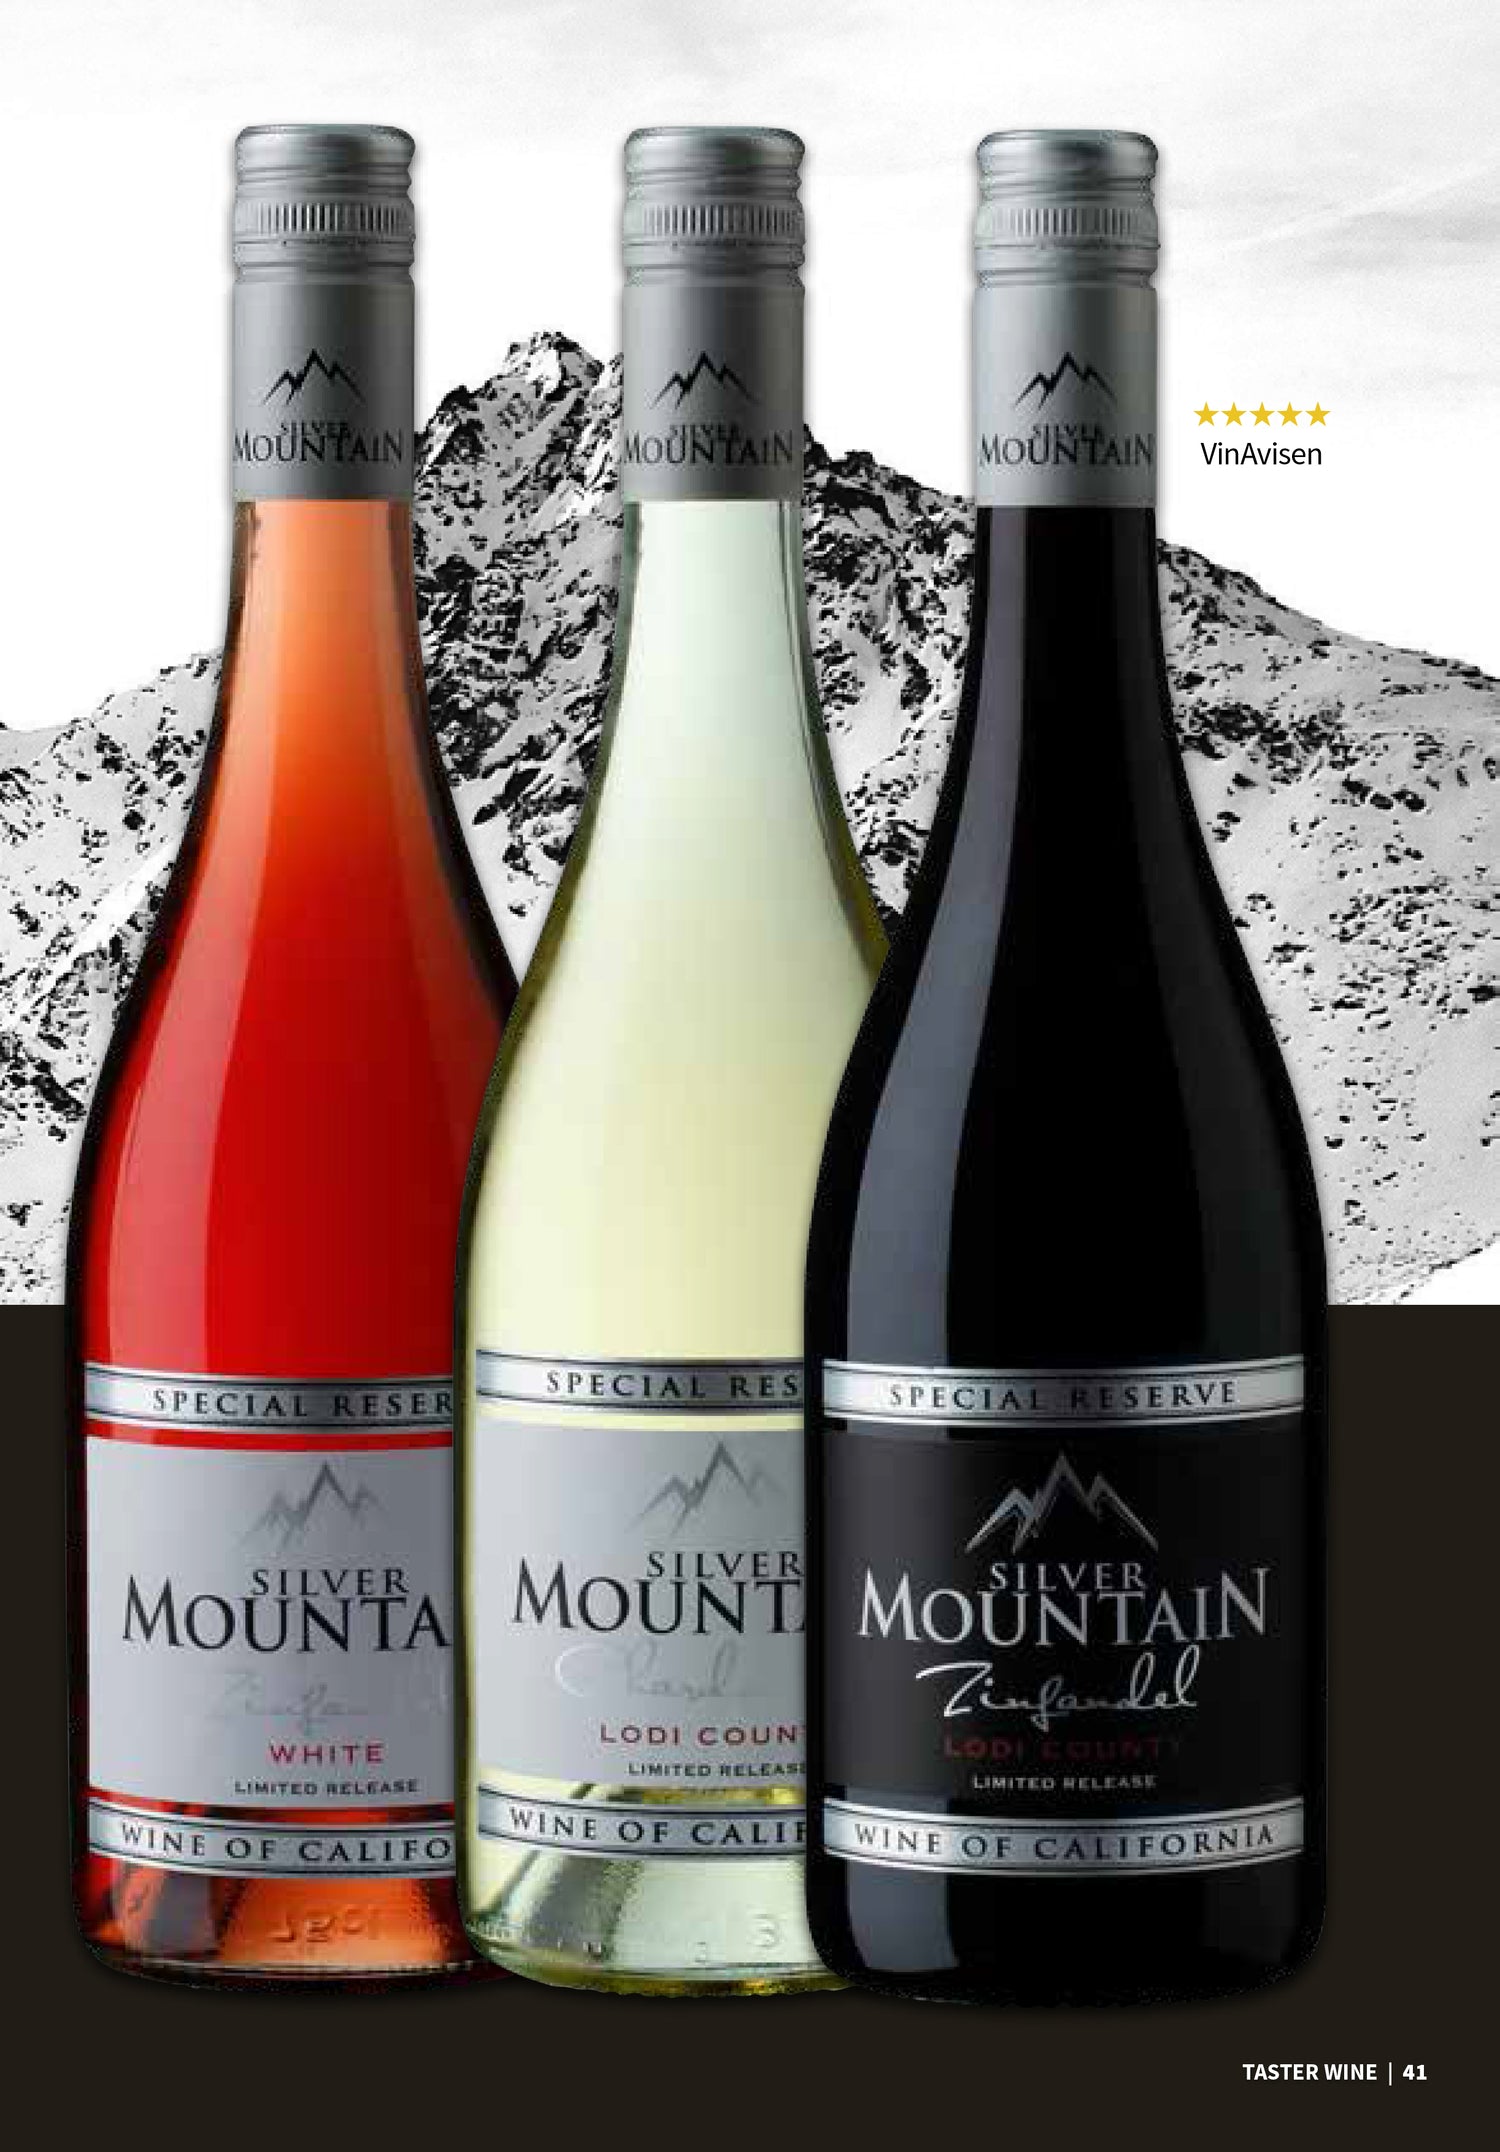 Silver Mountain Special Reserve Zinfandel 2018 - Bloom Concept